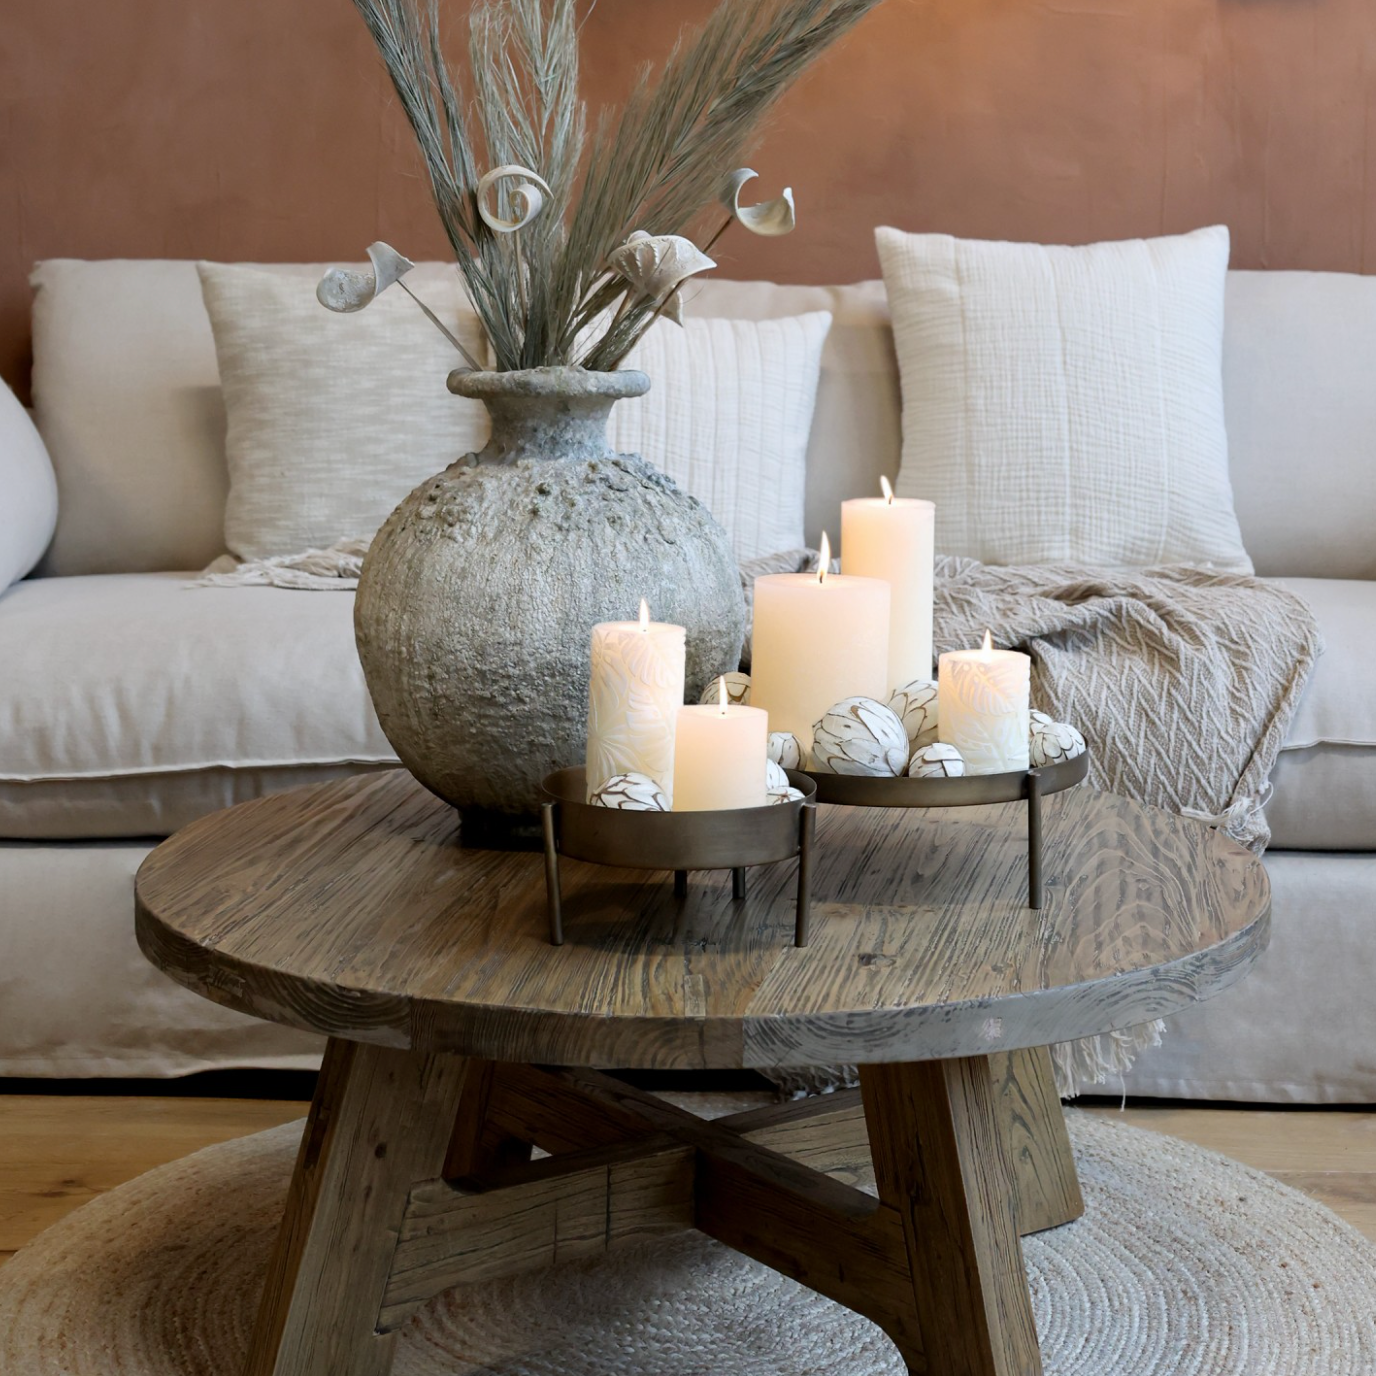 Round Wooden Coffee Table with rustic vase and candles